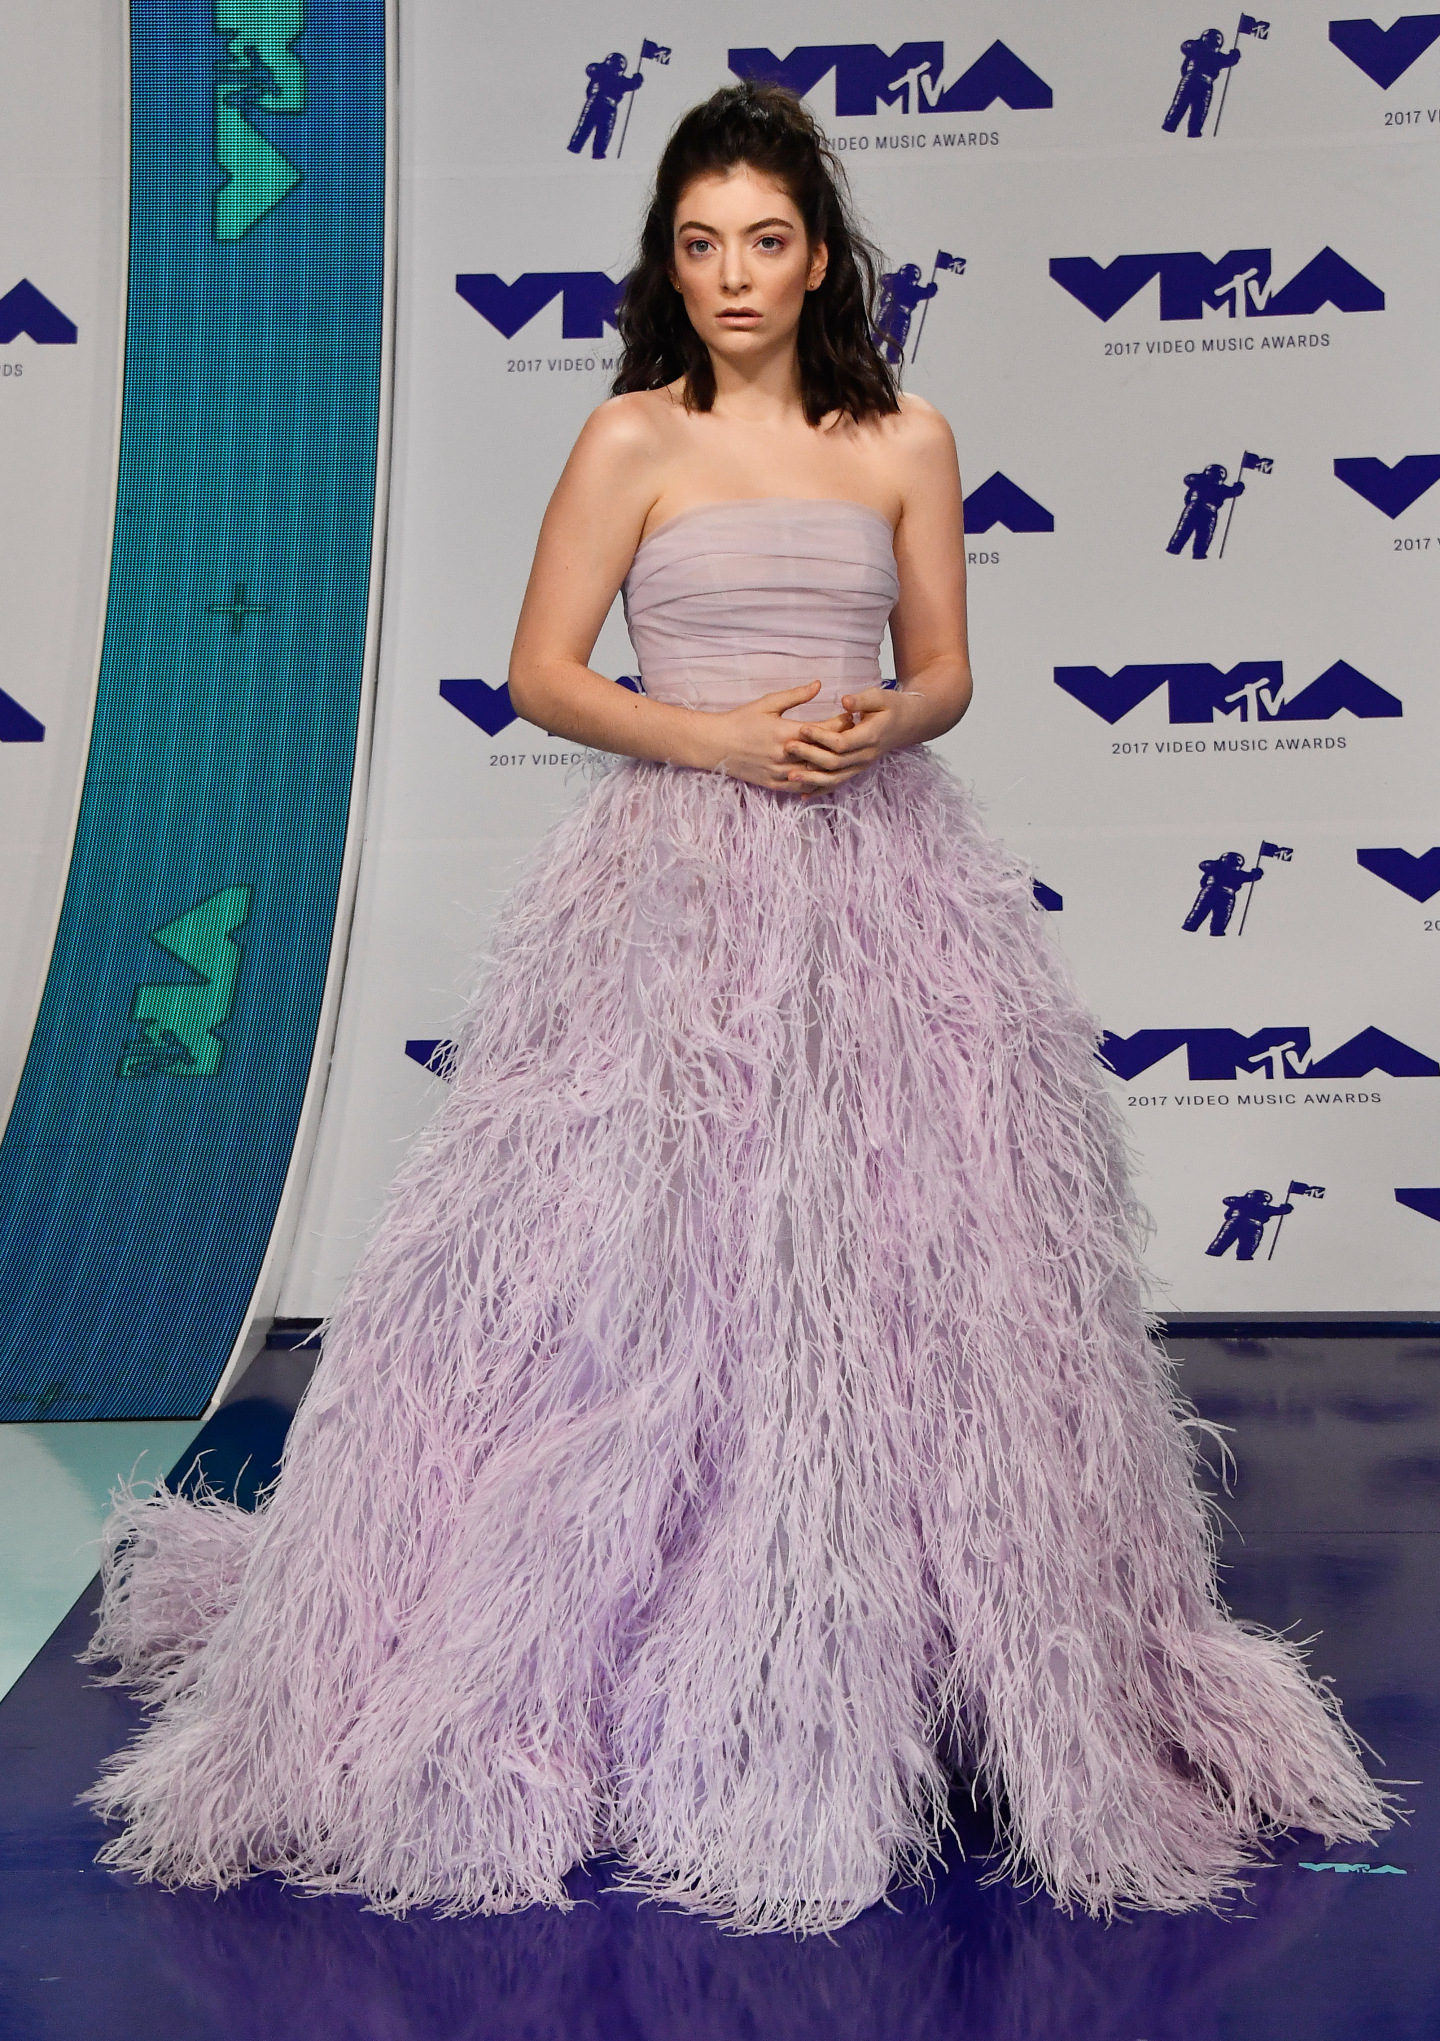 Here Are All The Looks You Need To See From The 2017 VMAs Red Carpet